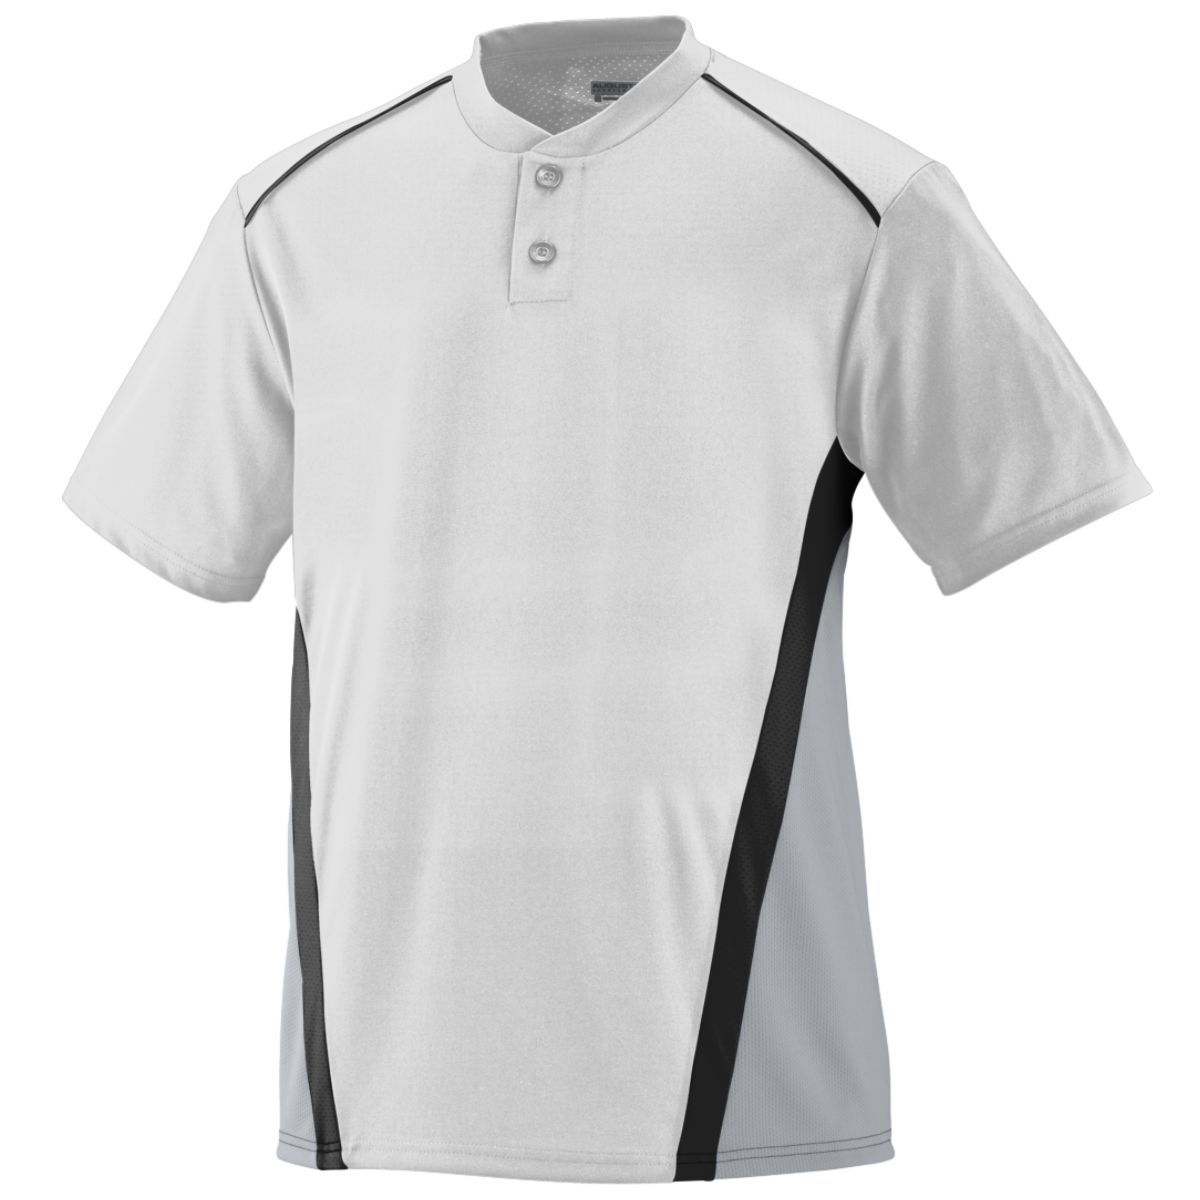 Augusta Sportswear Rbi Jersey in White/Silver Grey/Black  -Part of the Adult, Adult-Jersey, Augusta-Products, Softball, Shirts product lines at KanaleyCreations.com